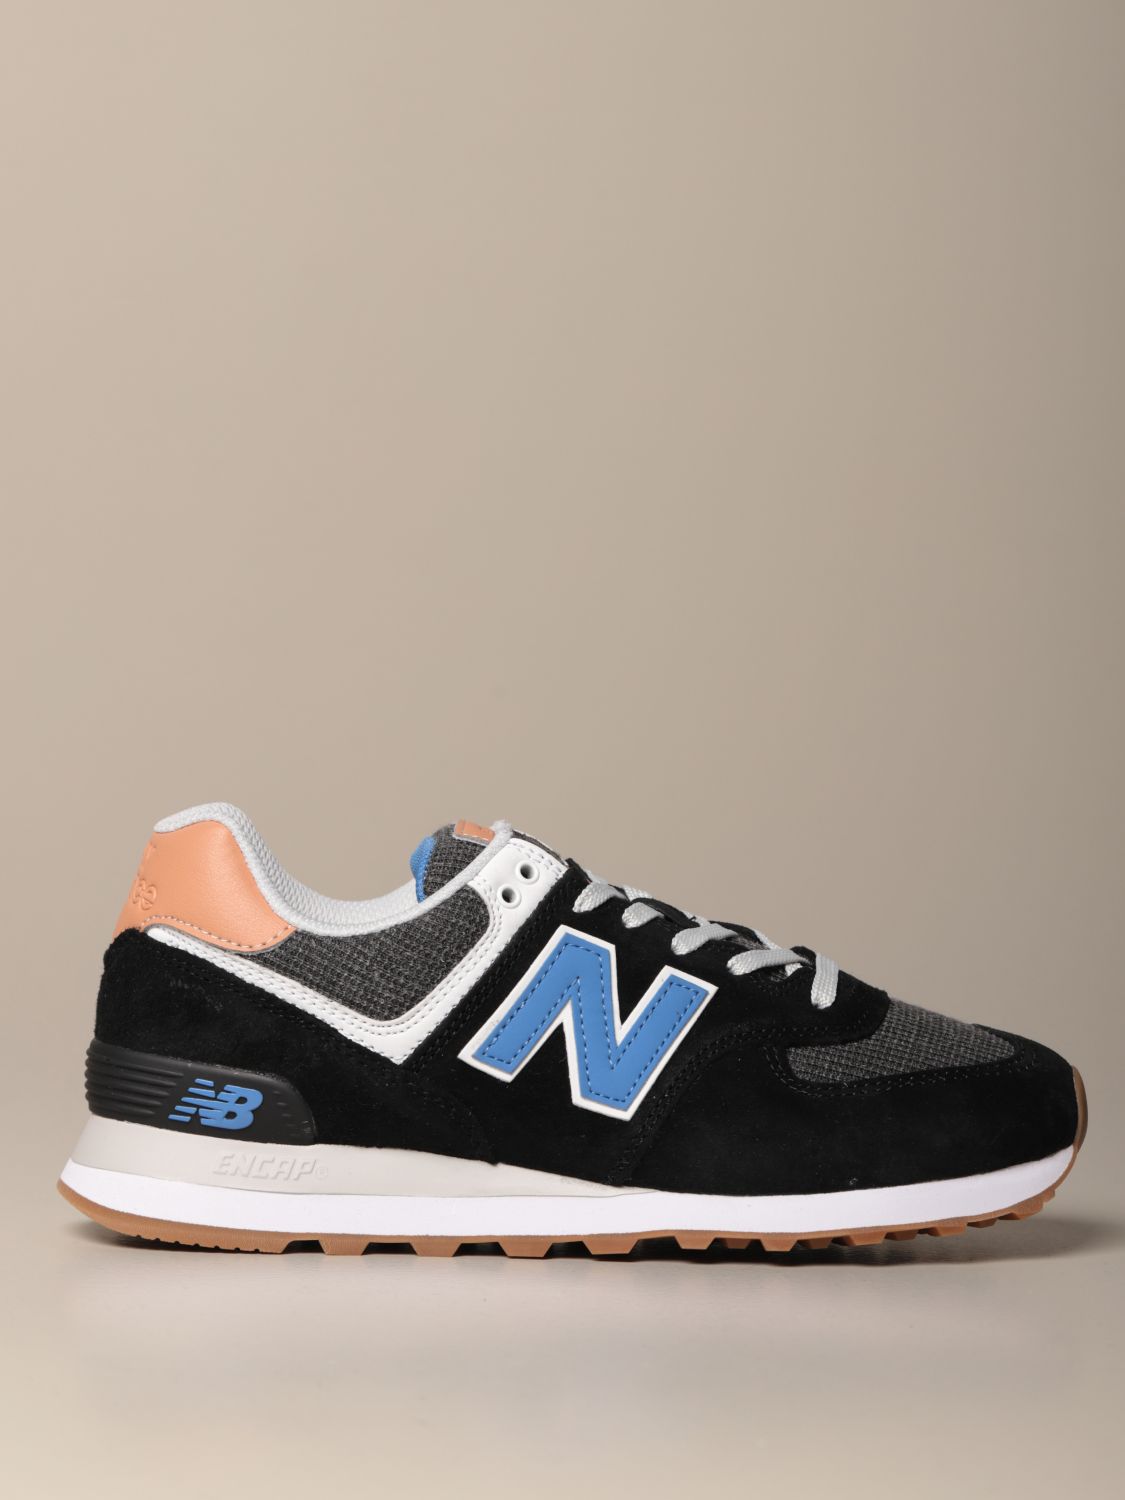 New Balance Outlet: 574 sneakers in suede and canvas | Sneakers ...